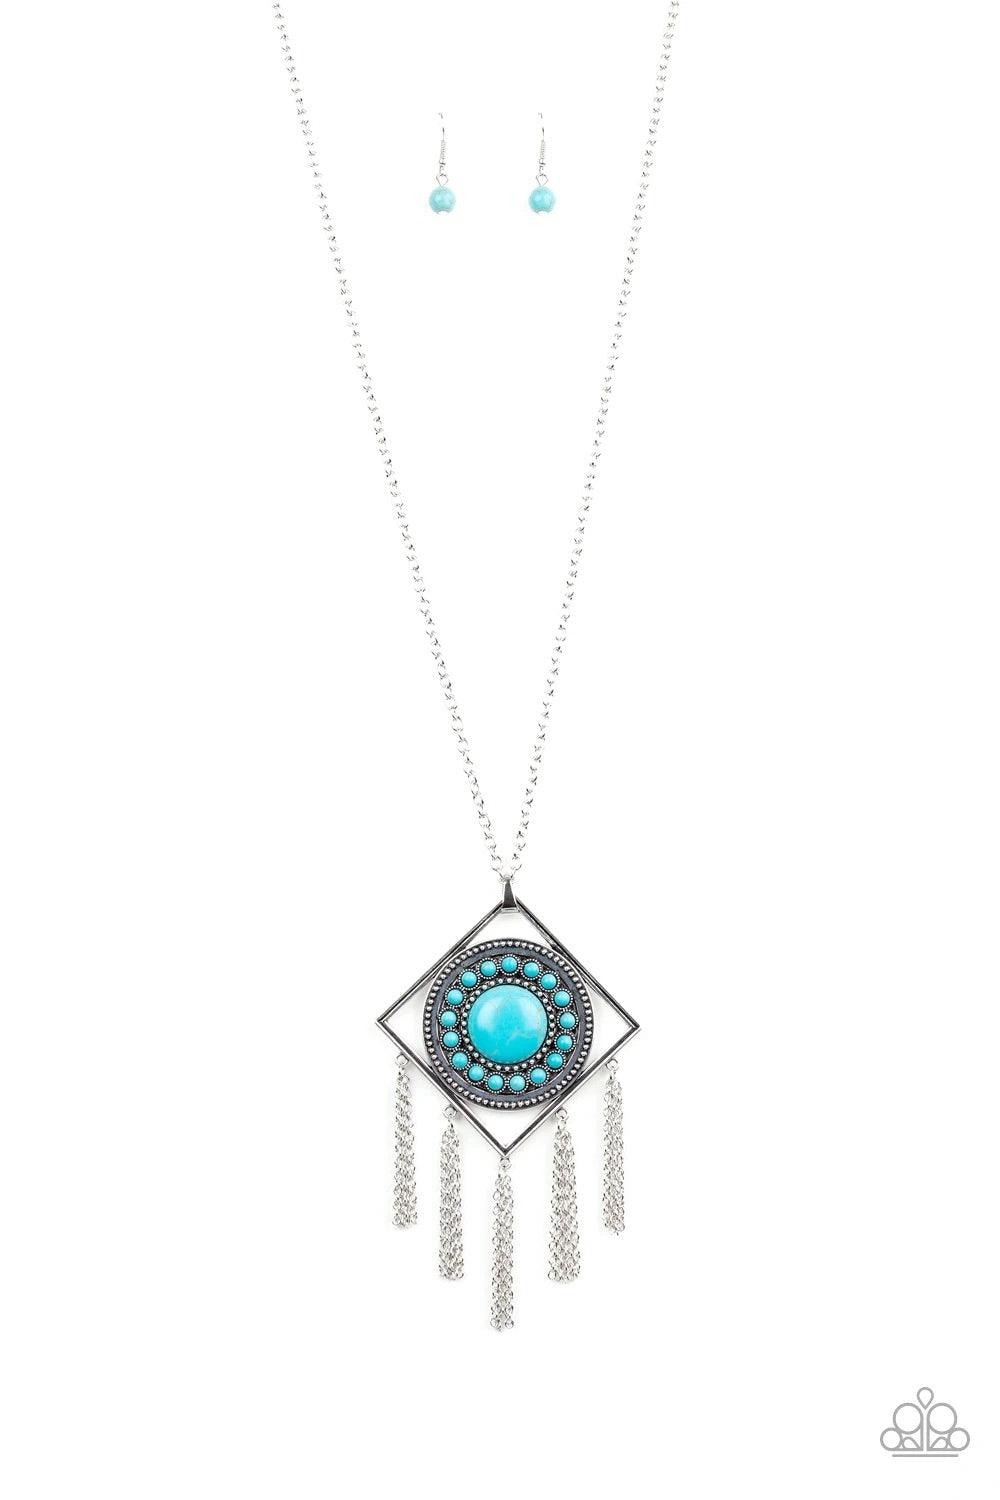 Paparazzi Accessories Sandstone Solstice - Blue Radiating with studded details and refreshing turquoise stones, a round frame is nestled inside of an airy silver square for a tribal inspired look. Attached to a lengthened silver chain, the colorful stone